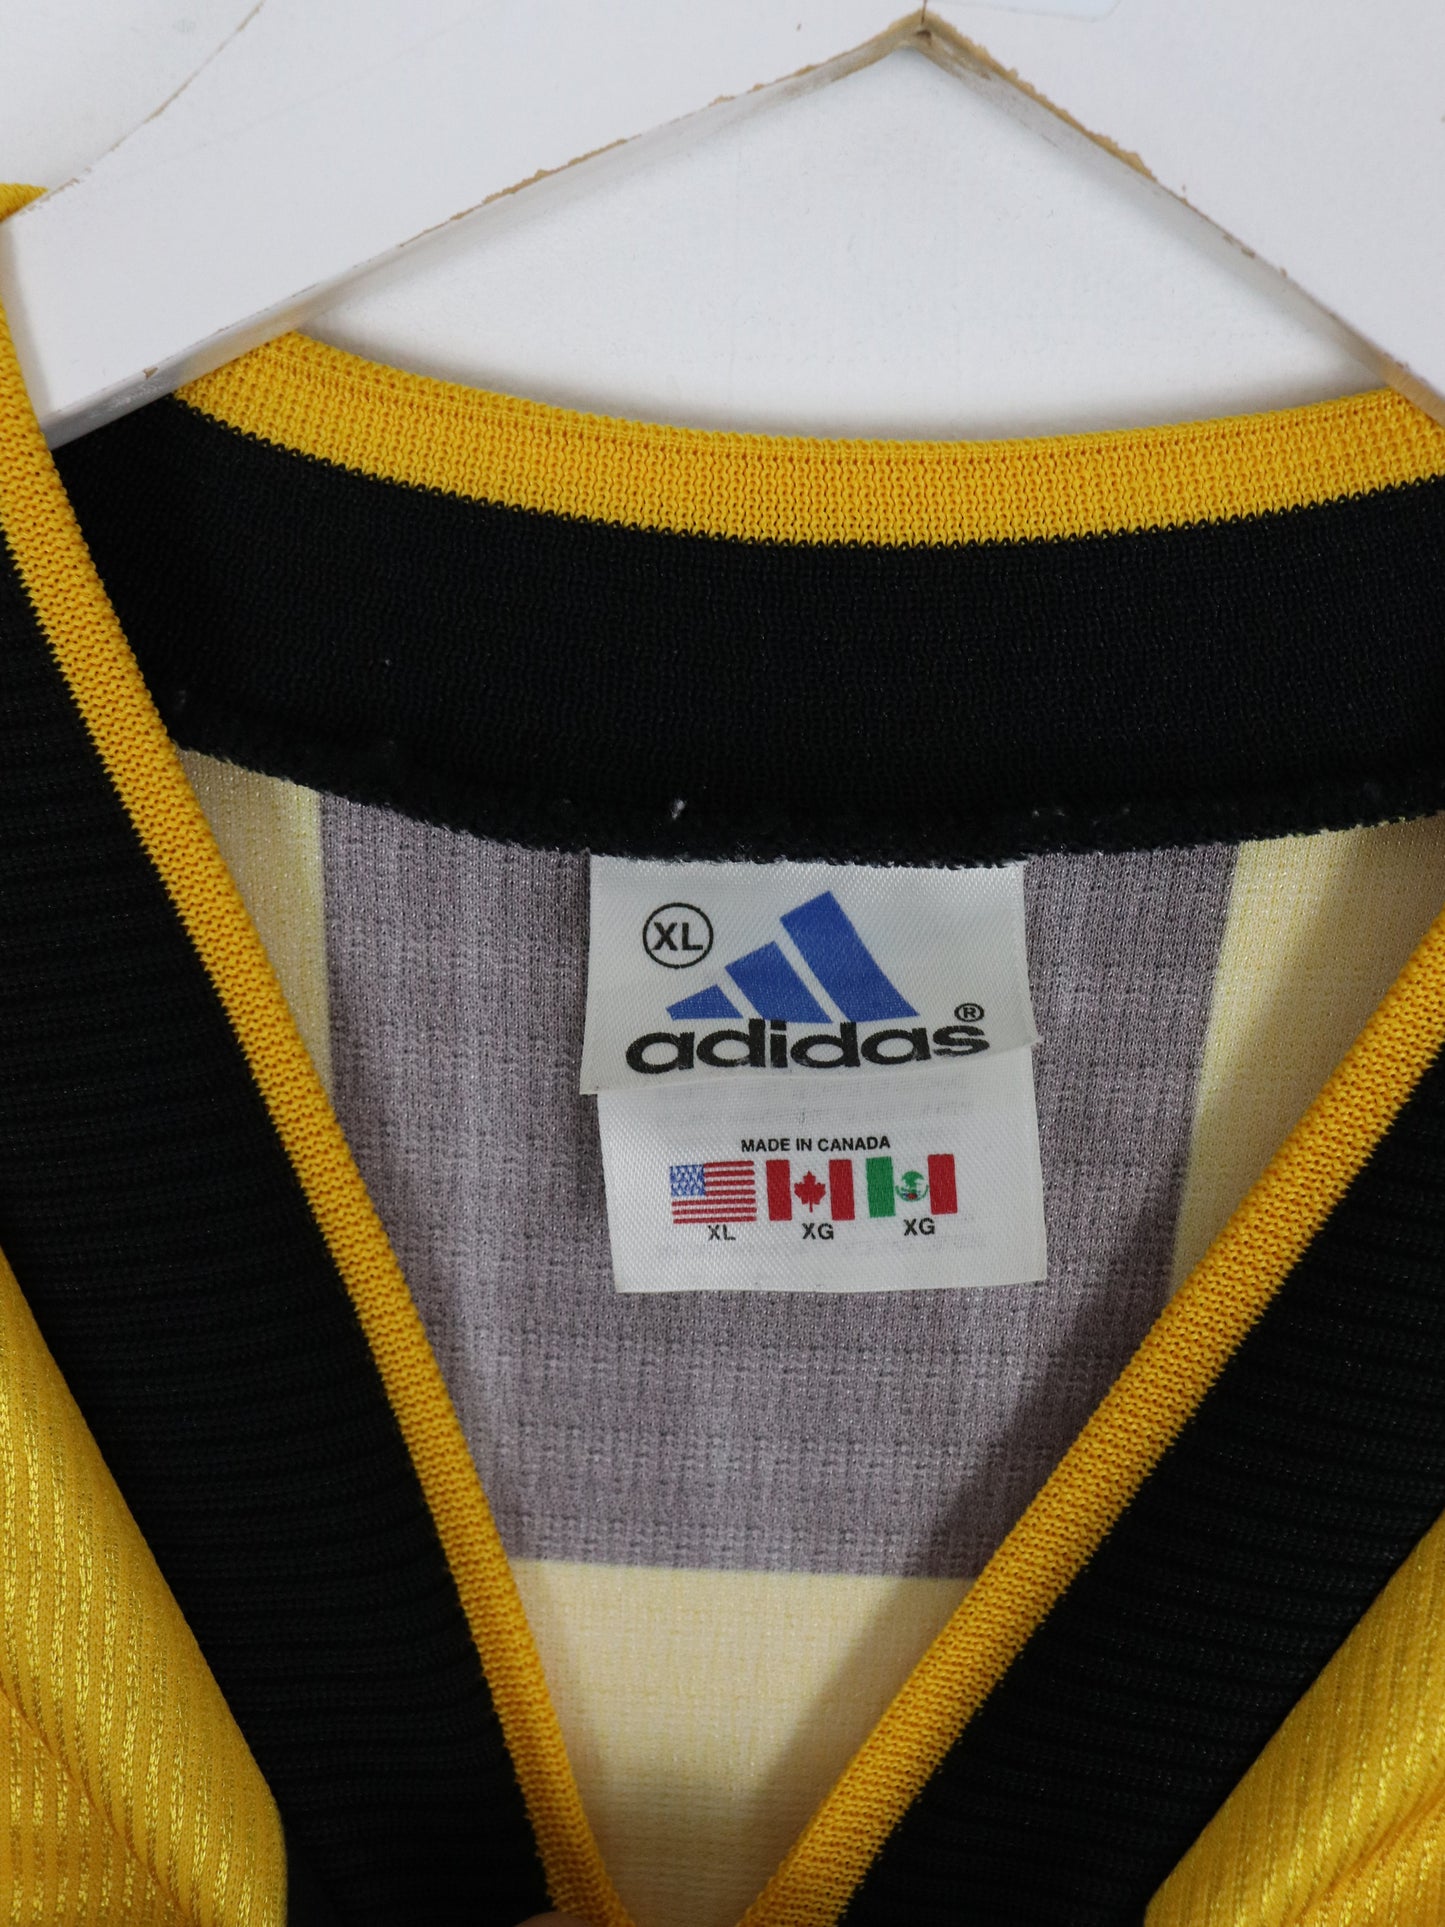 Vintage Adidas Soccer Jersey Mens XL Yellow 90s